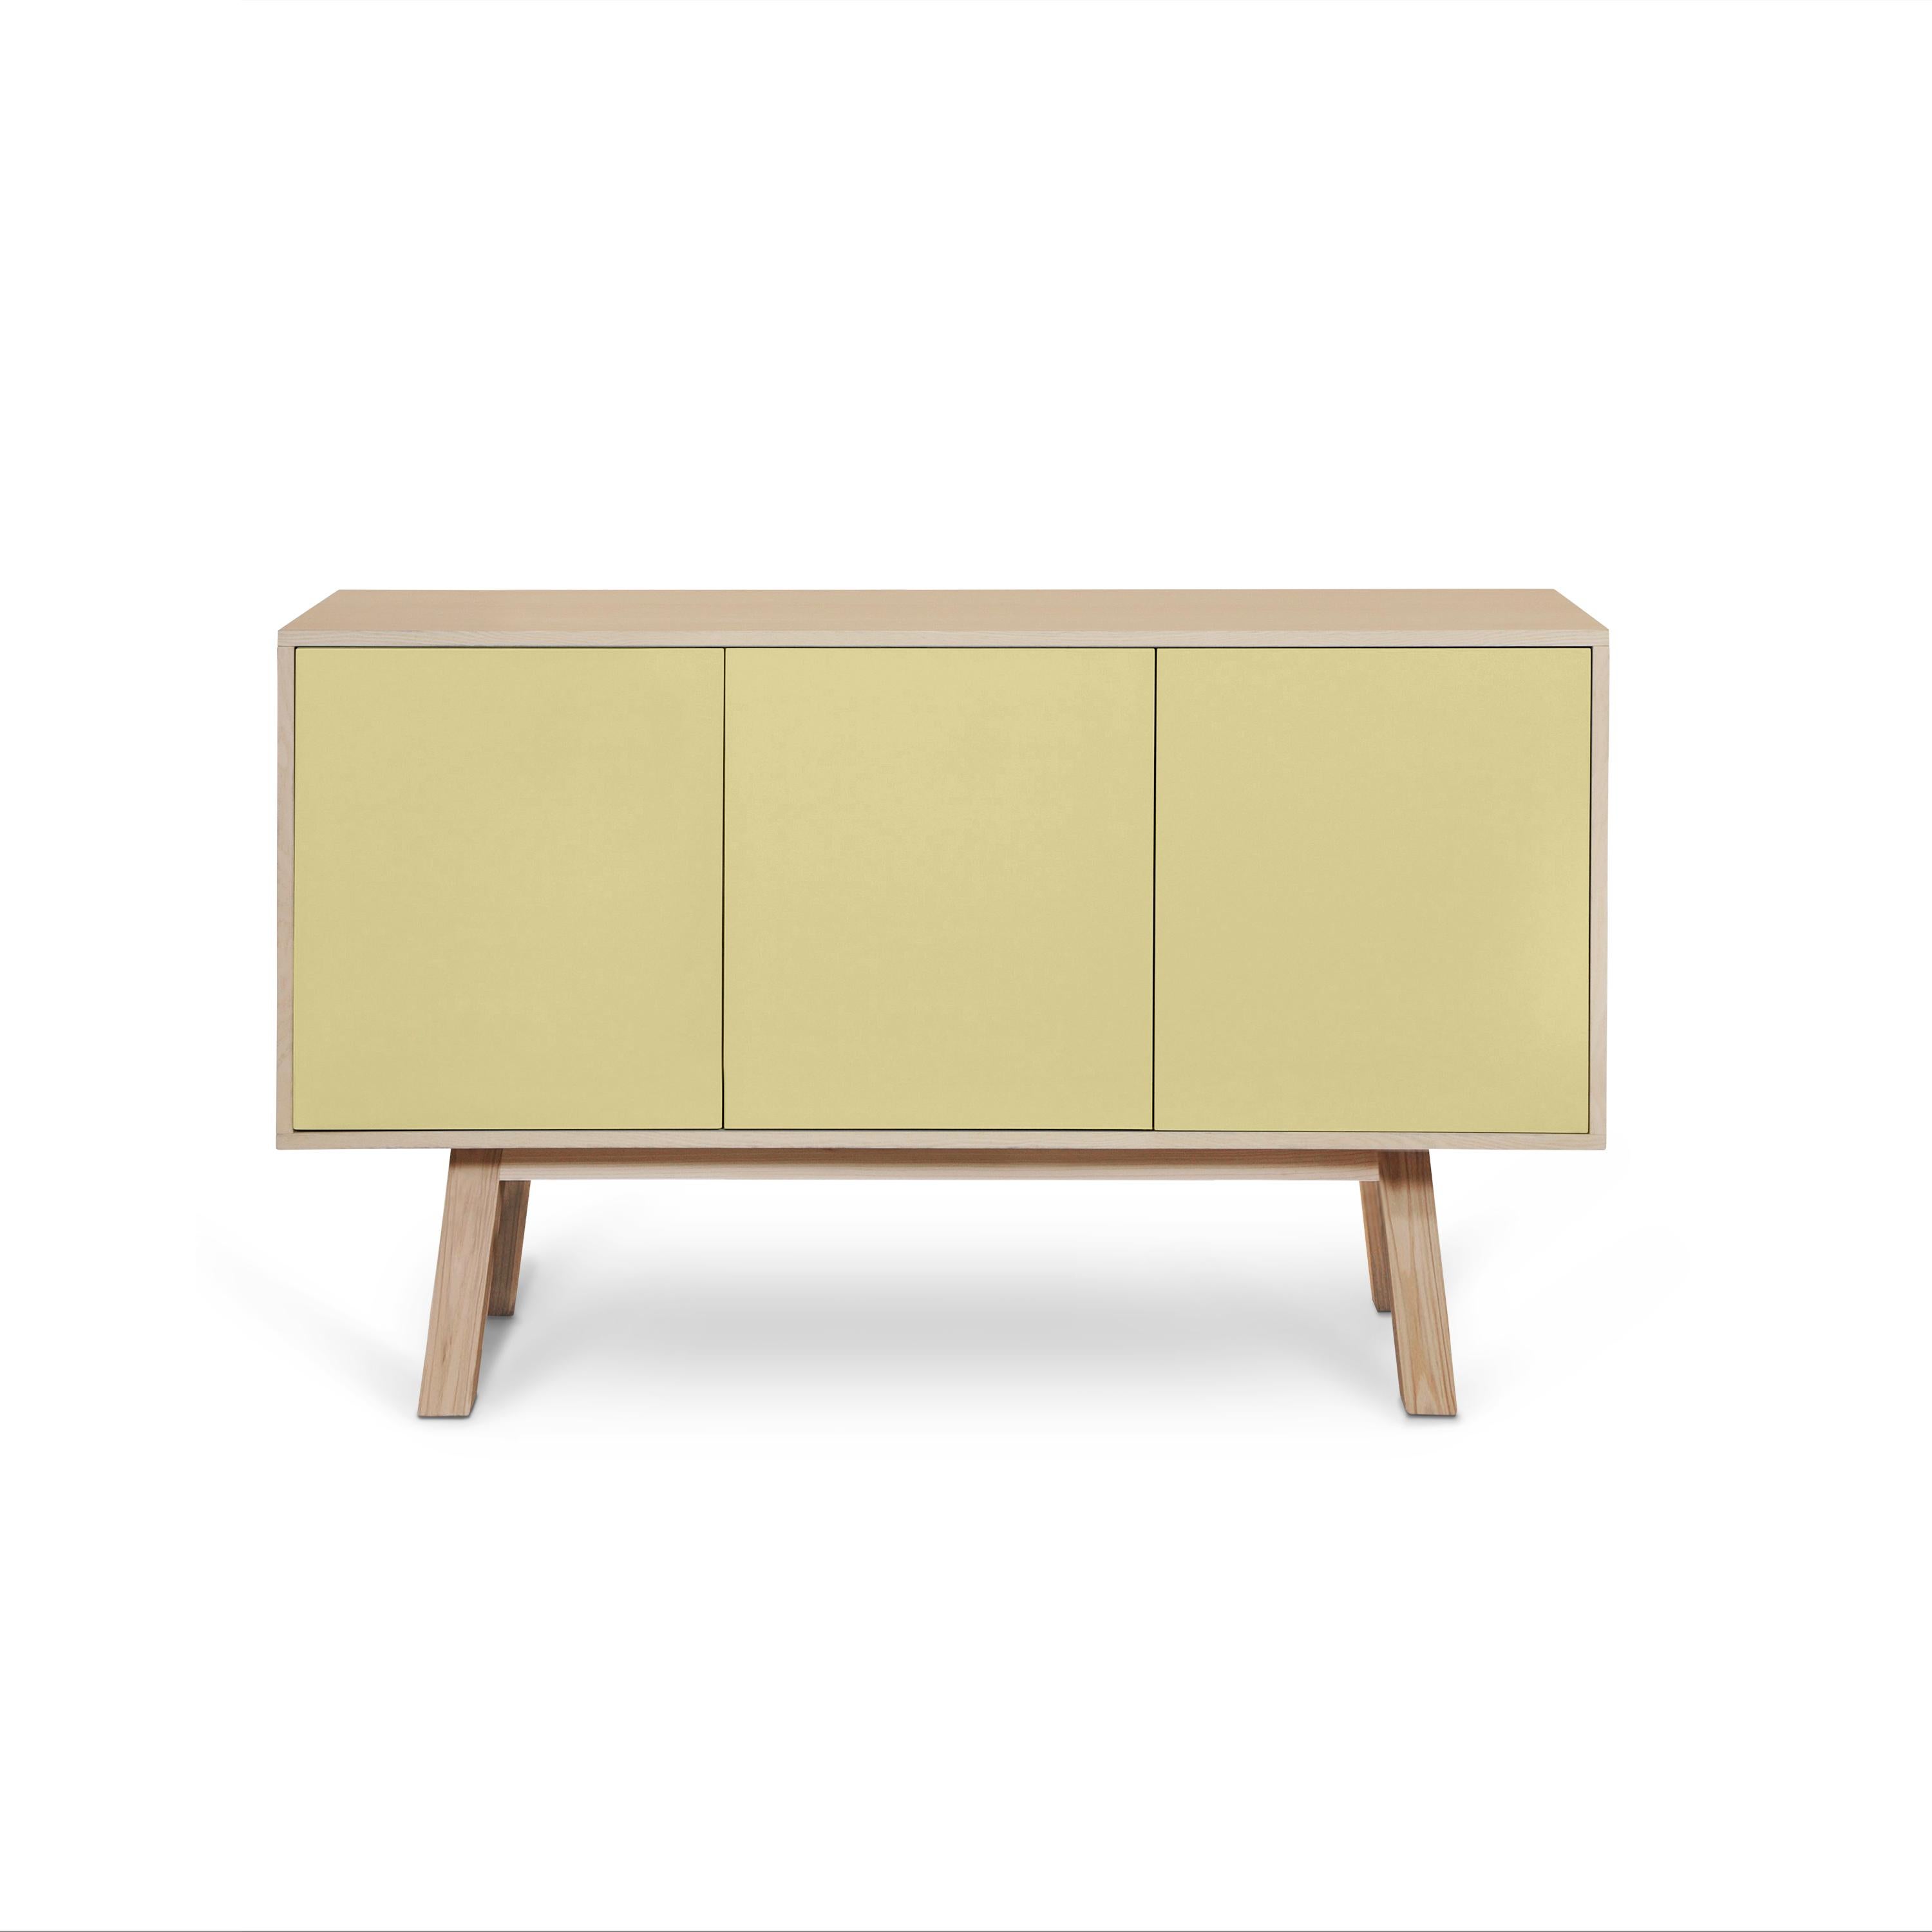 This 3-door sideboard is 100% made in France in oak, veneer oak and with lacquered doors in MDF panels. 

The 3 doors open with a 